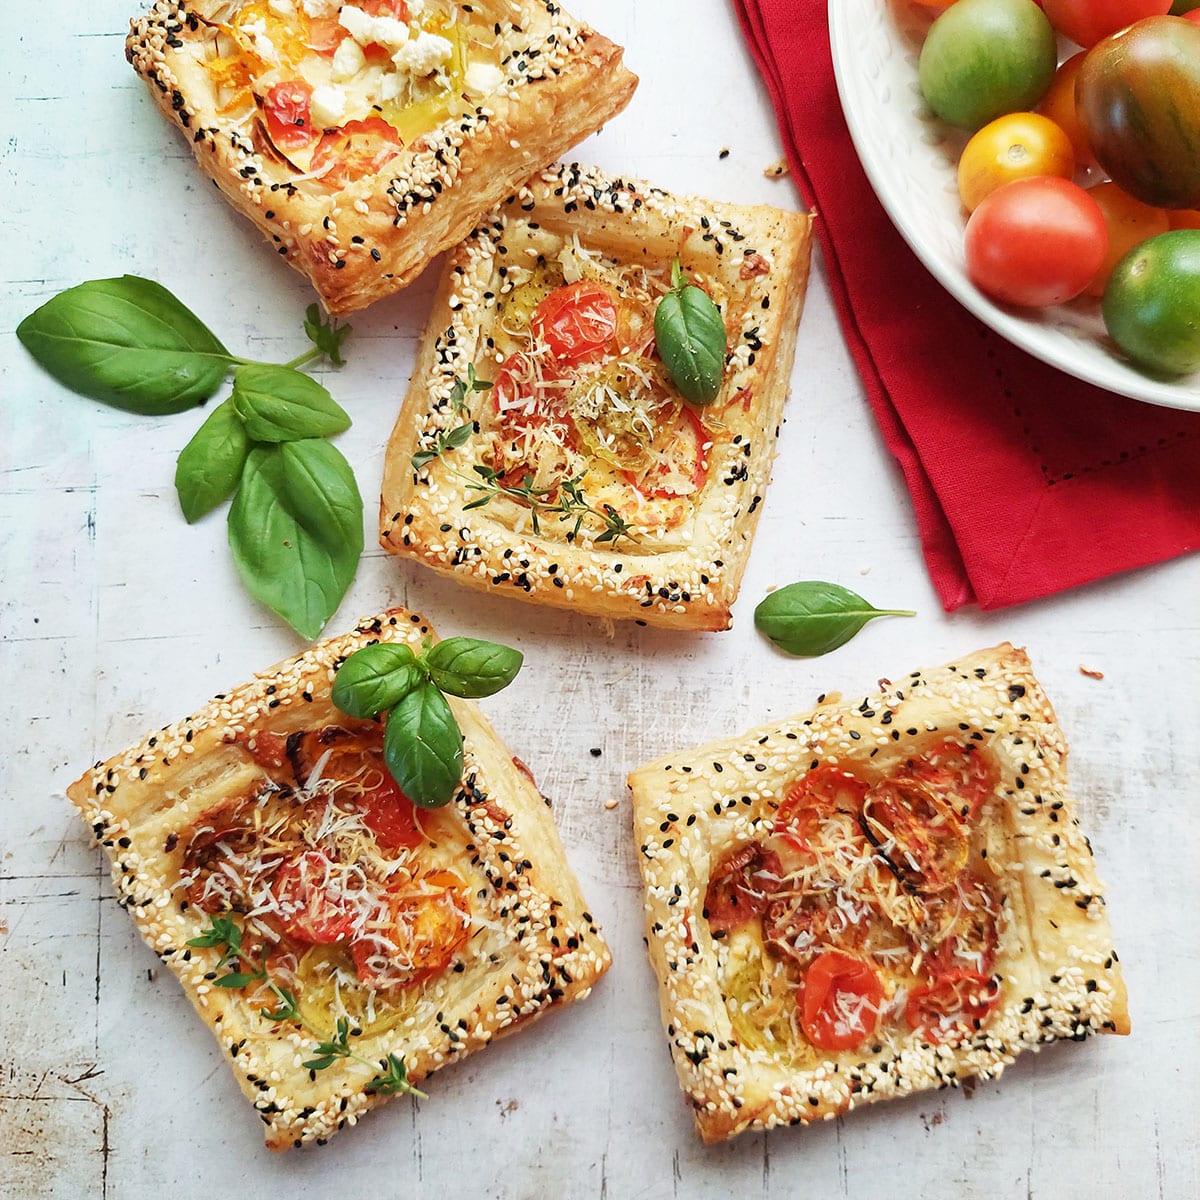 These Easy Tomato and Cheese Tarts with Puff Pastry are perfect for a quick and simple lunch or dinner, picnics or appetizer.